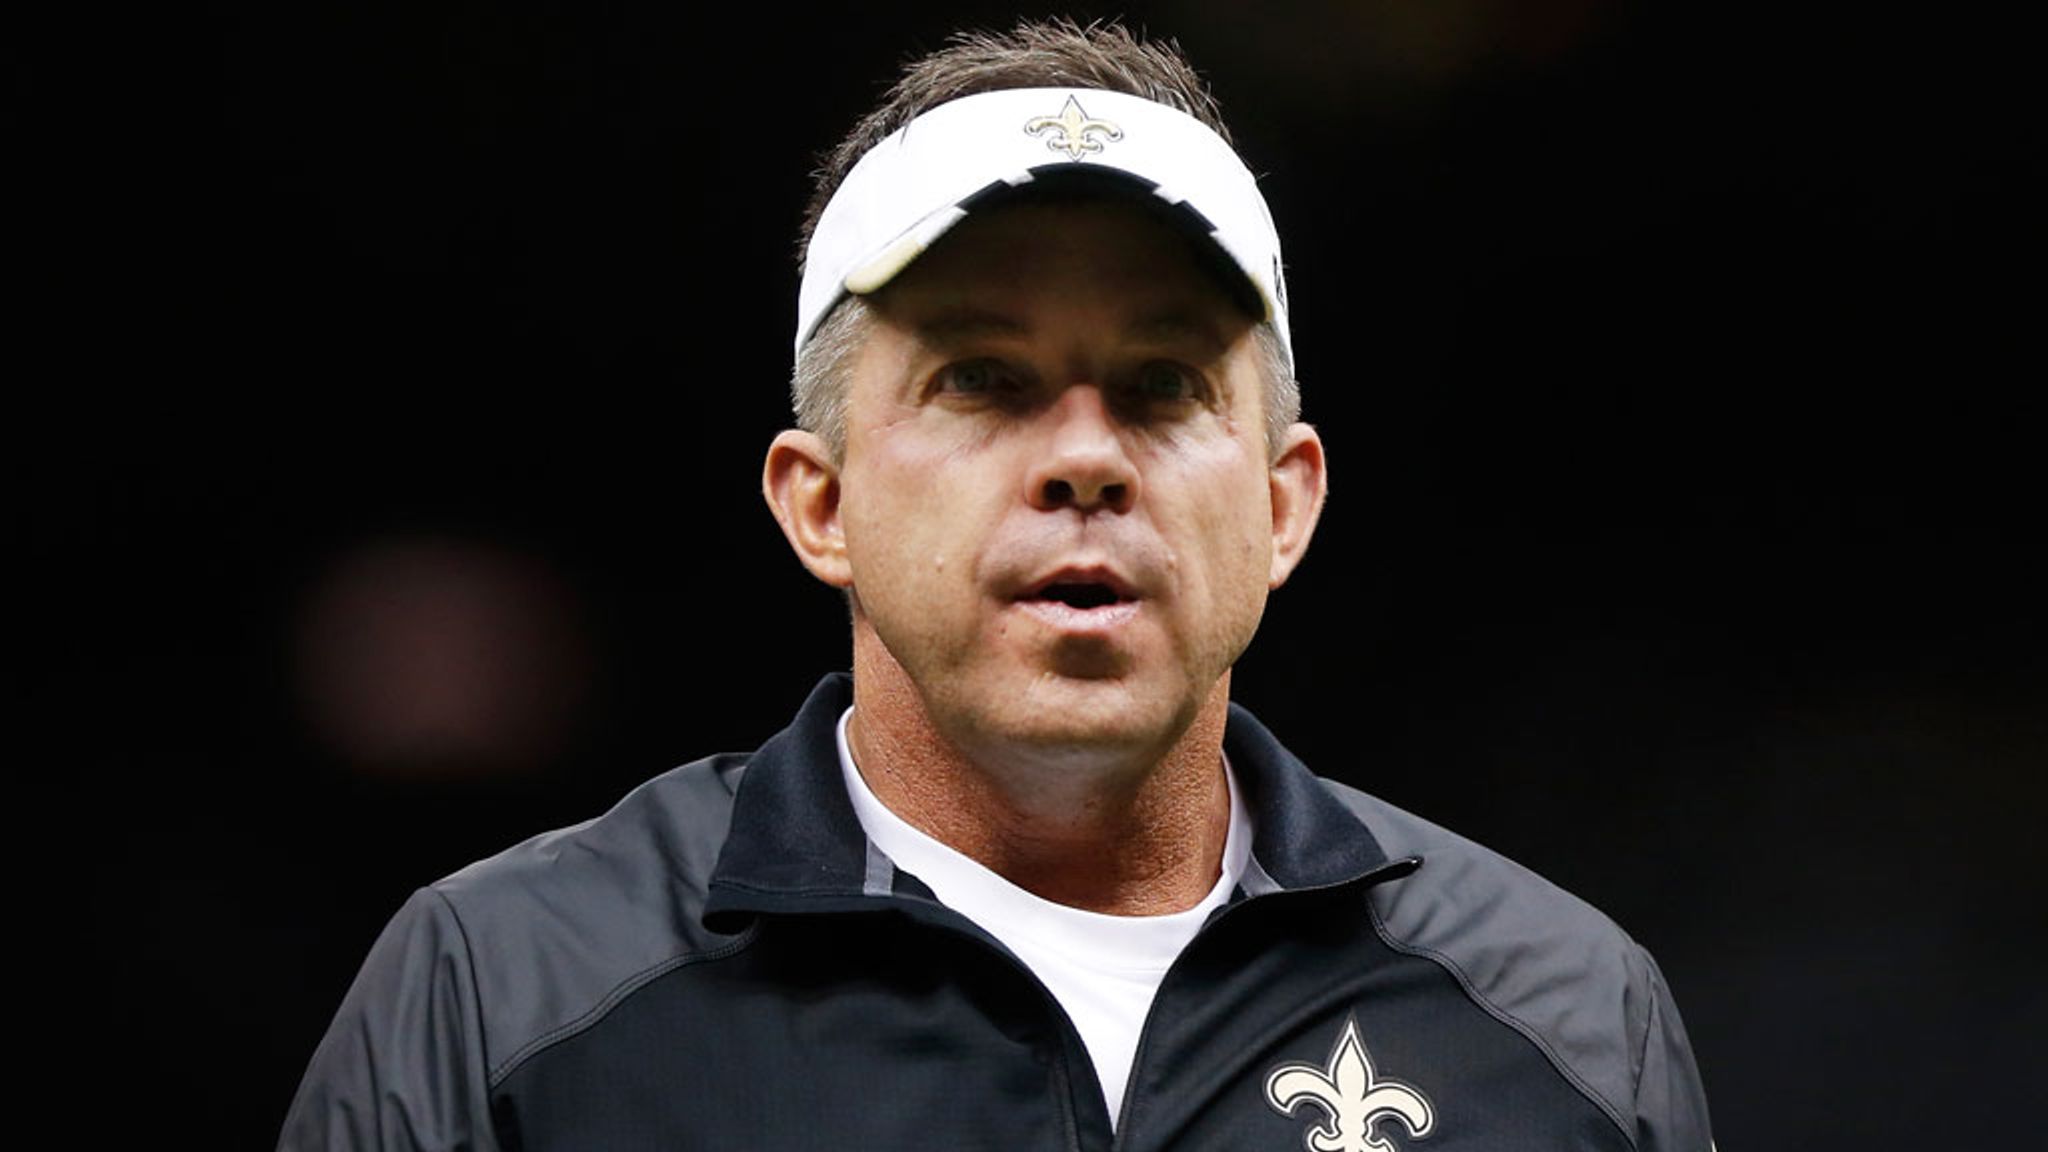 Who is the New Orleans Saints head coach?